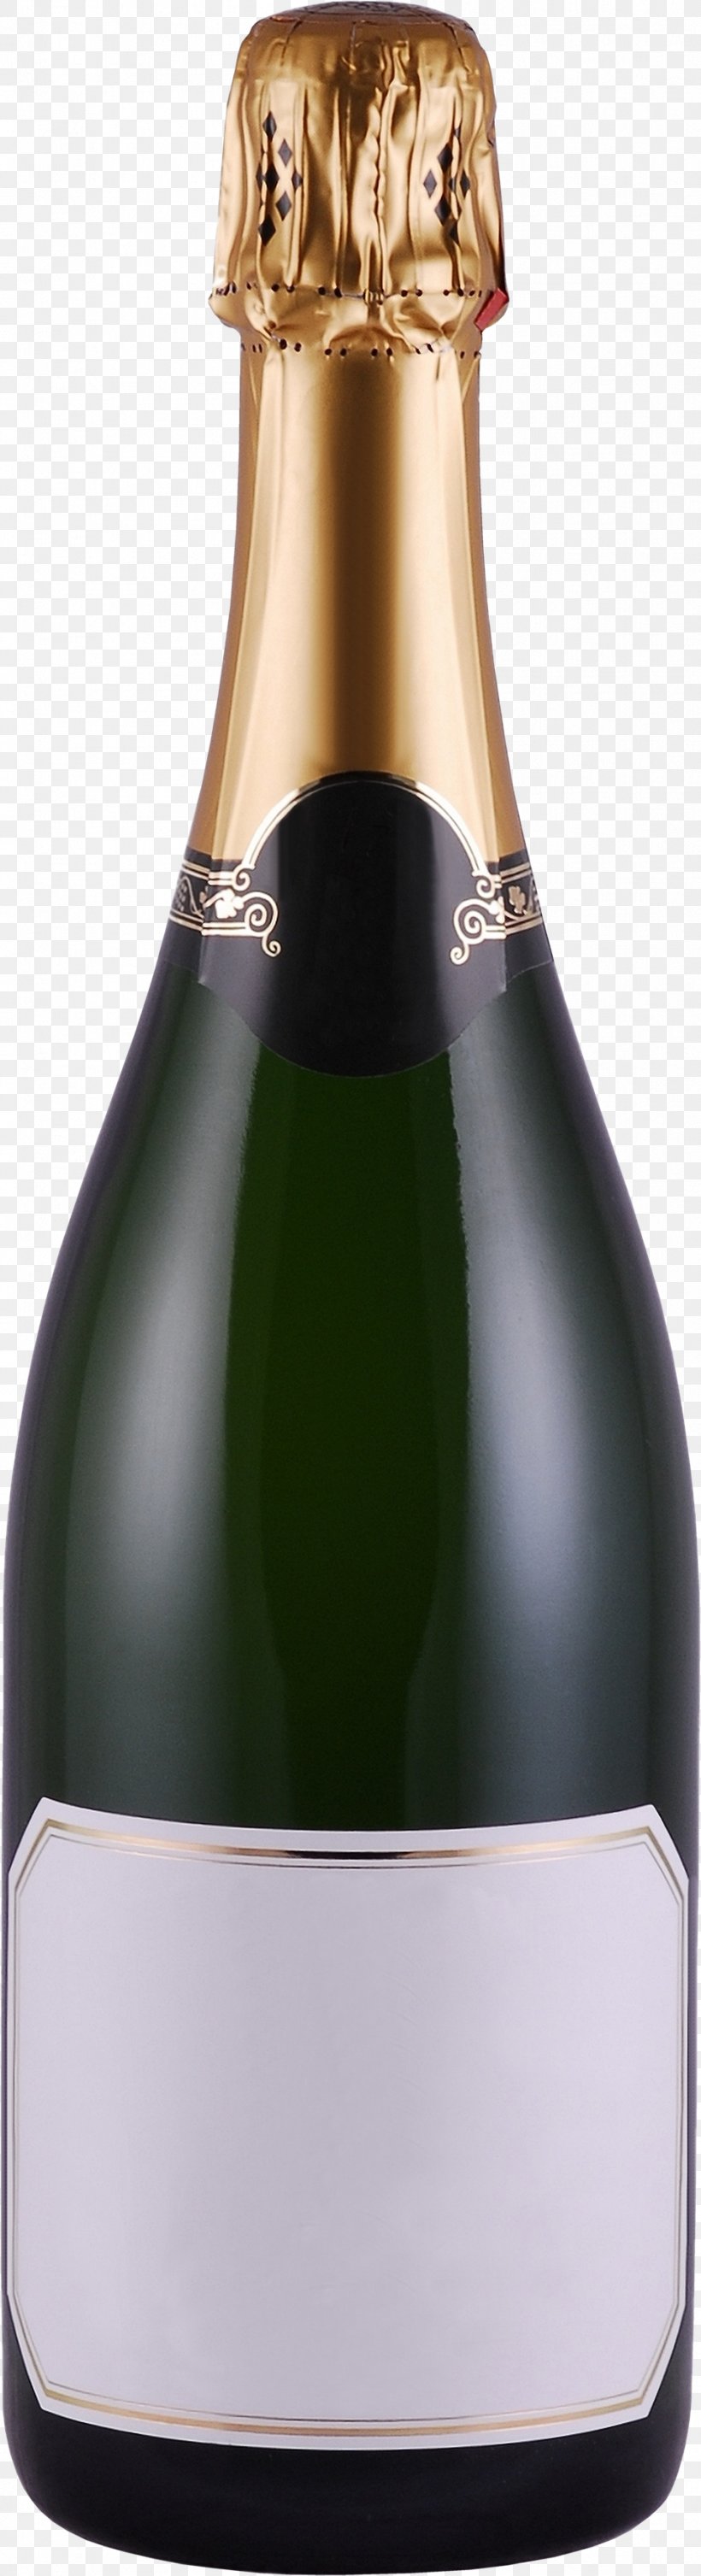 Champagne Bottle Moët & Chandon, PNG, 952x3500px, Champagne, Alcoholic Beverage, Bottle, Clipping Path, Display Resolution Download Free